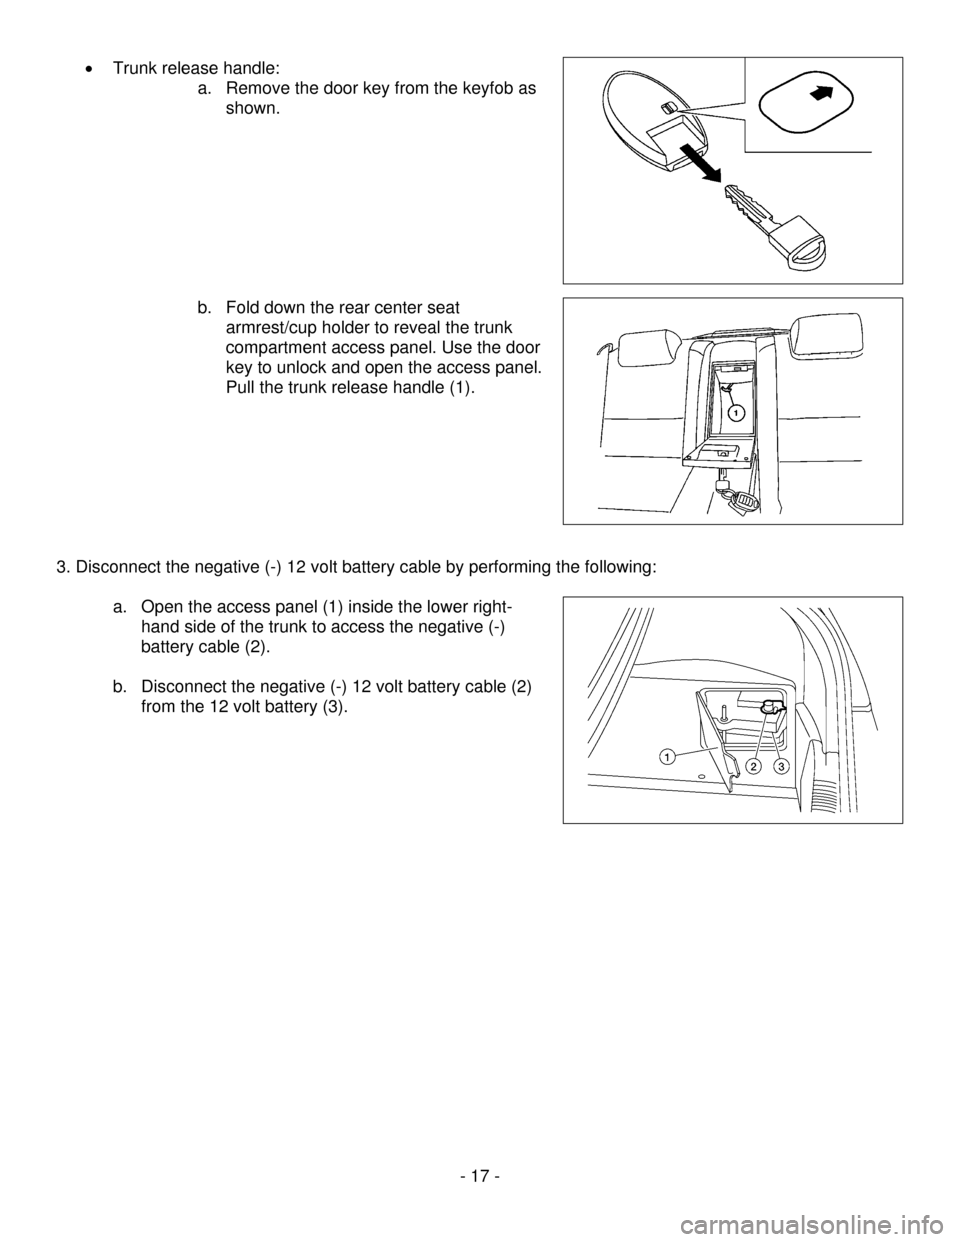 NISSAN ALTIMA HYBRID 2009 L32A / 4.G Dismantling Guide      - 17 - 
•
  Trunk release handle:   
a.  Remove the door key from the keyfob as 
shown.  
 
 
 
 
 
 
 
   b. Fold down the rear center seat 
armrest/cup holder to reveal the trunk 
compartment